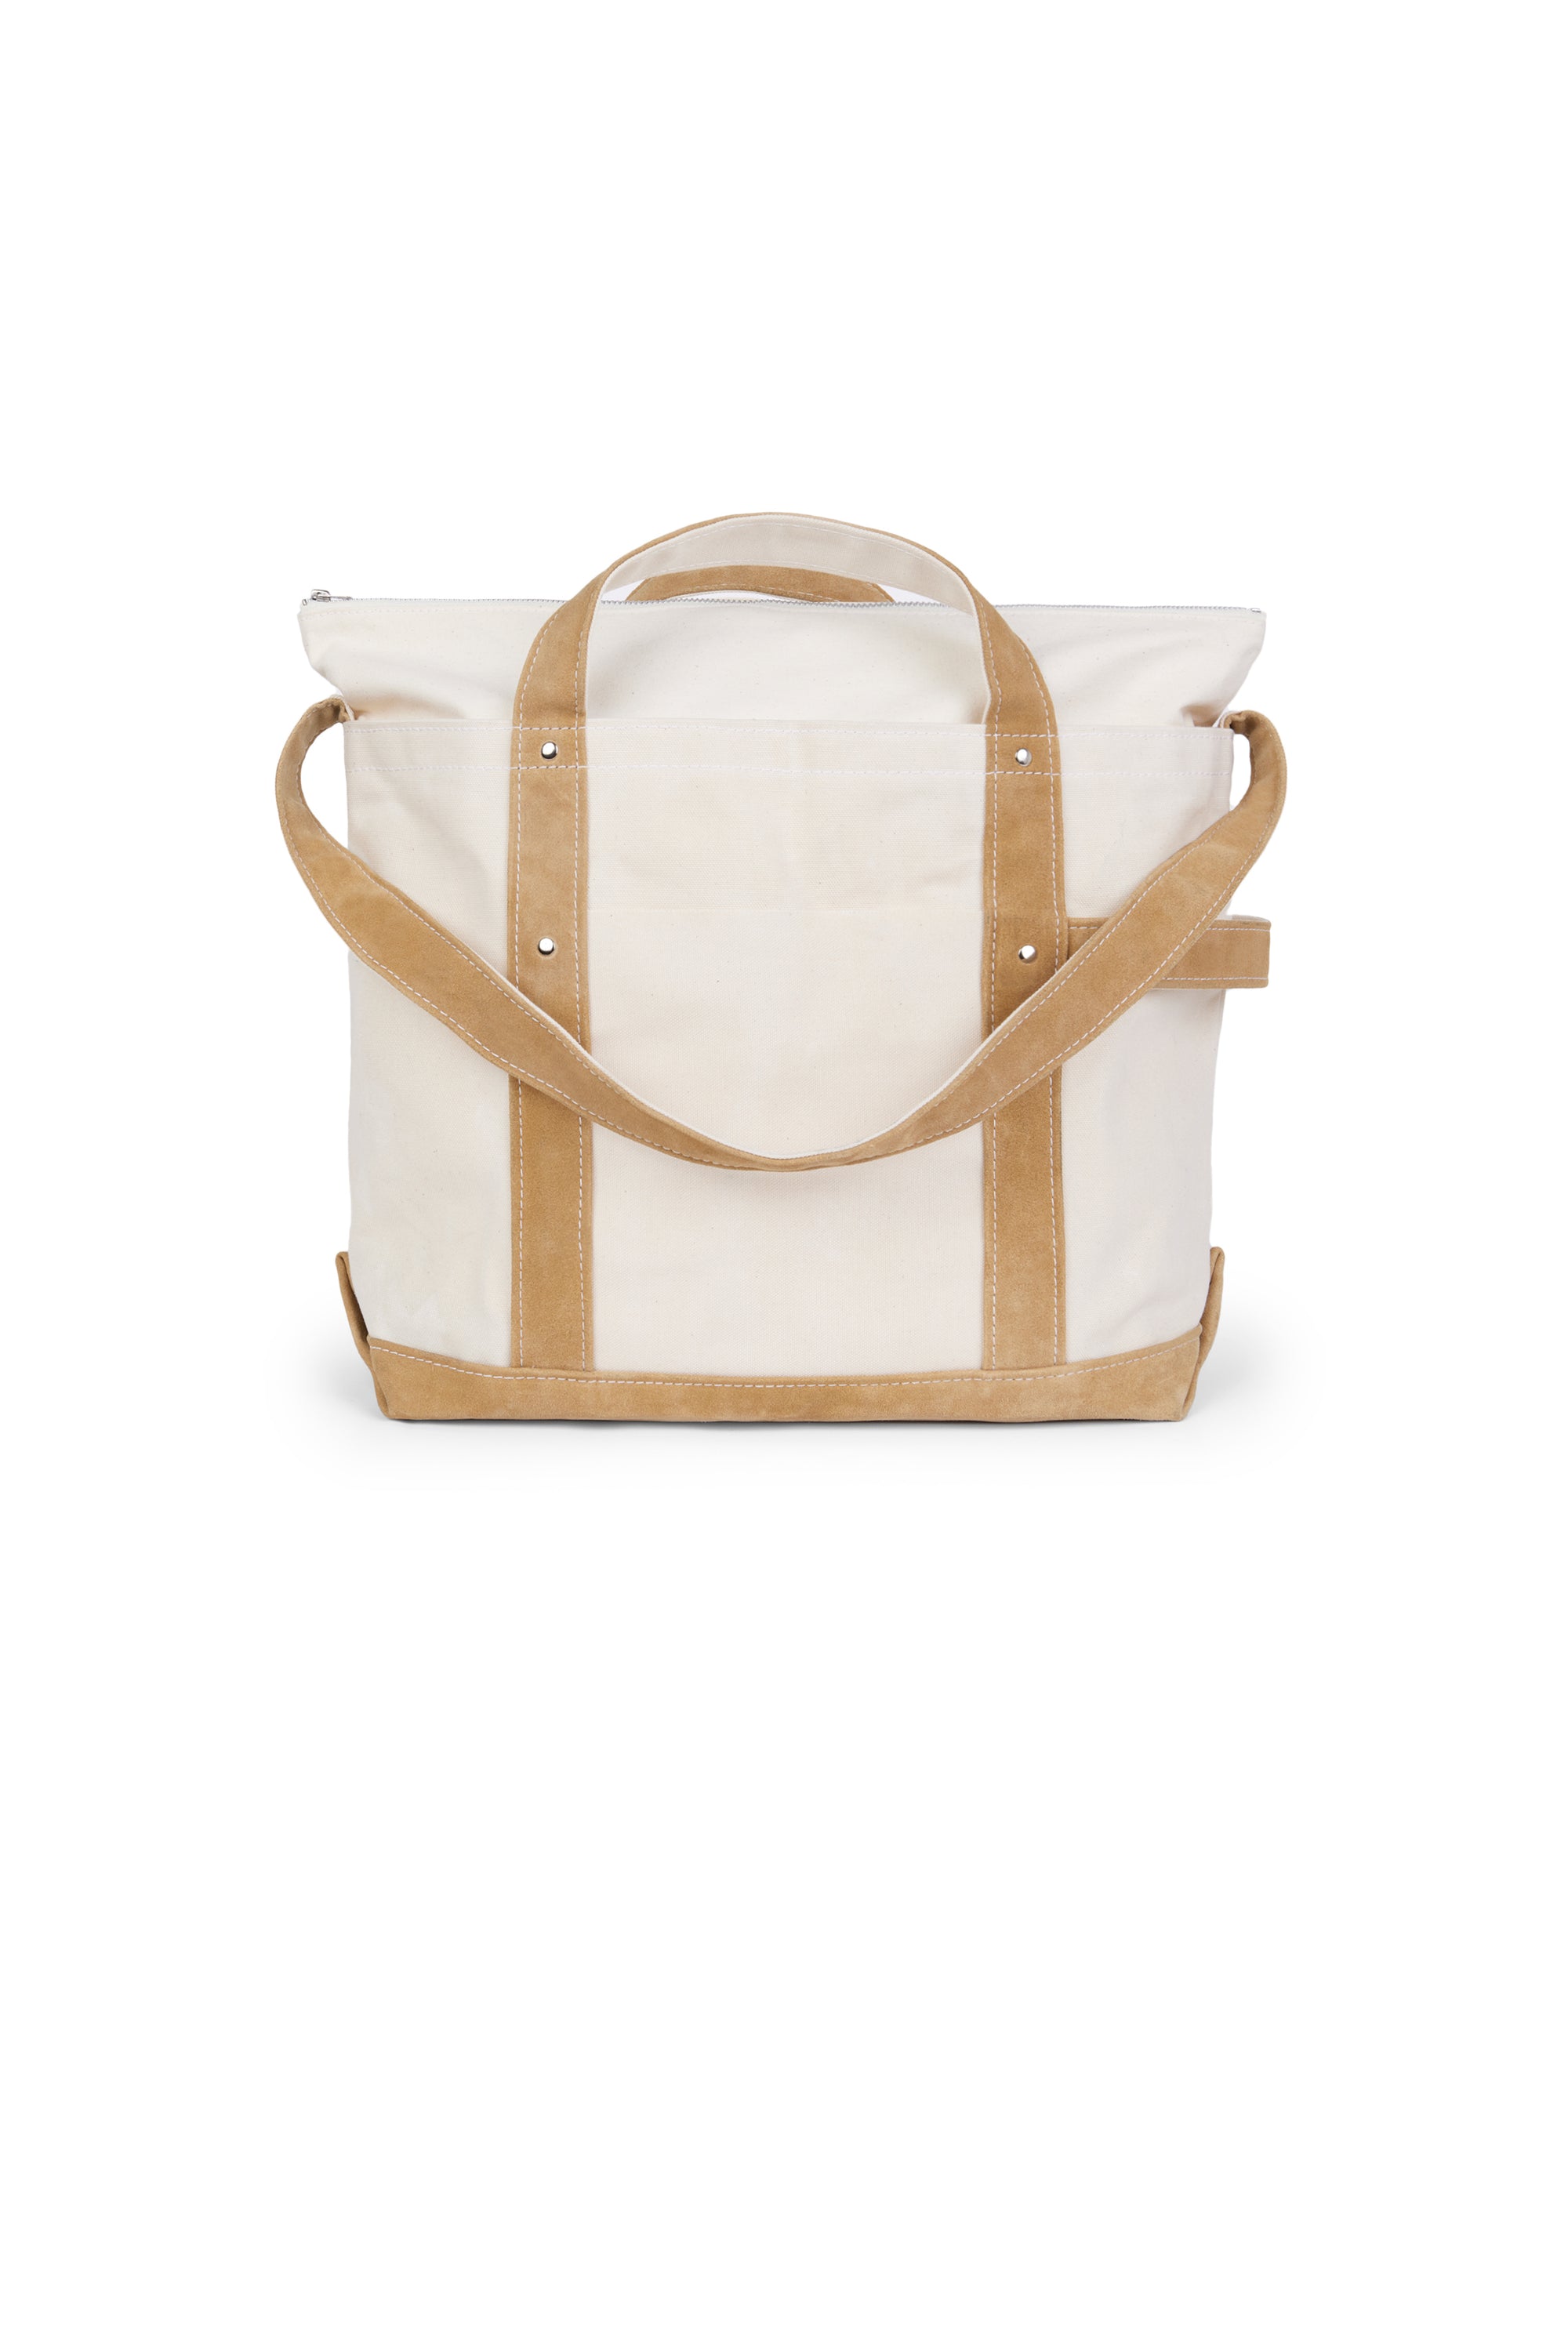 The Tembea Harvest Tote, Exclusively for Blackstock & Weber